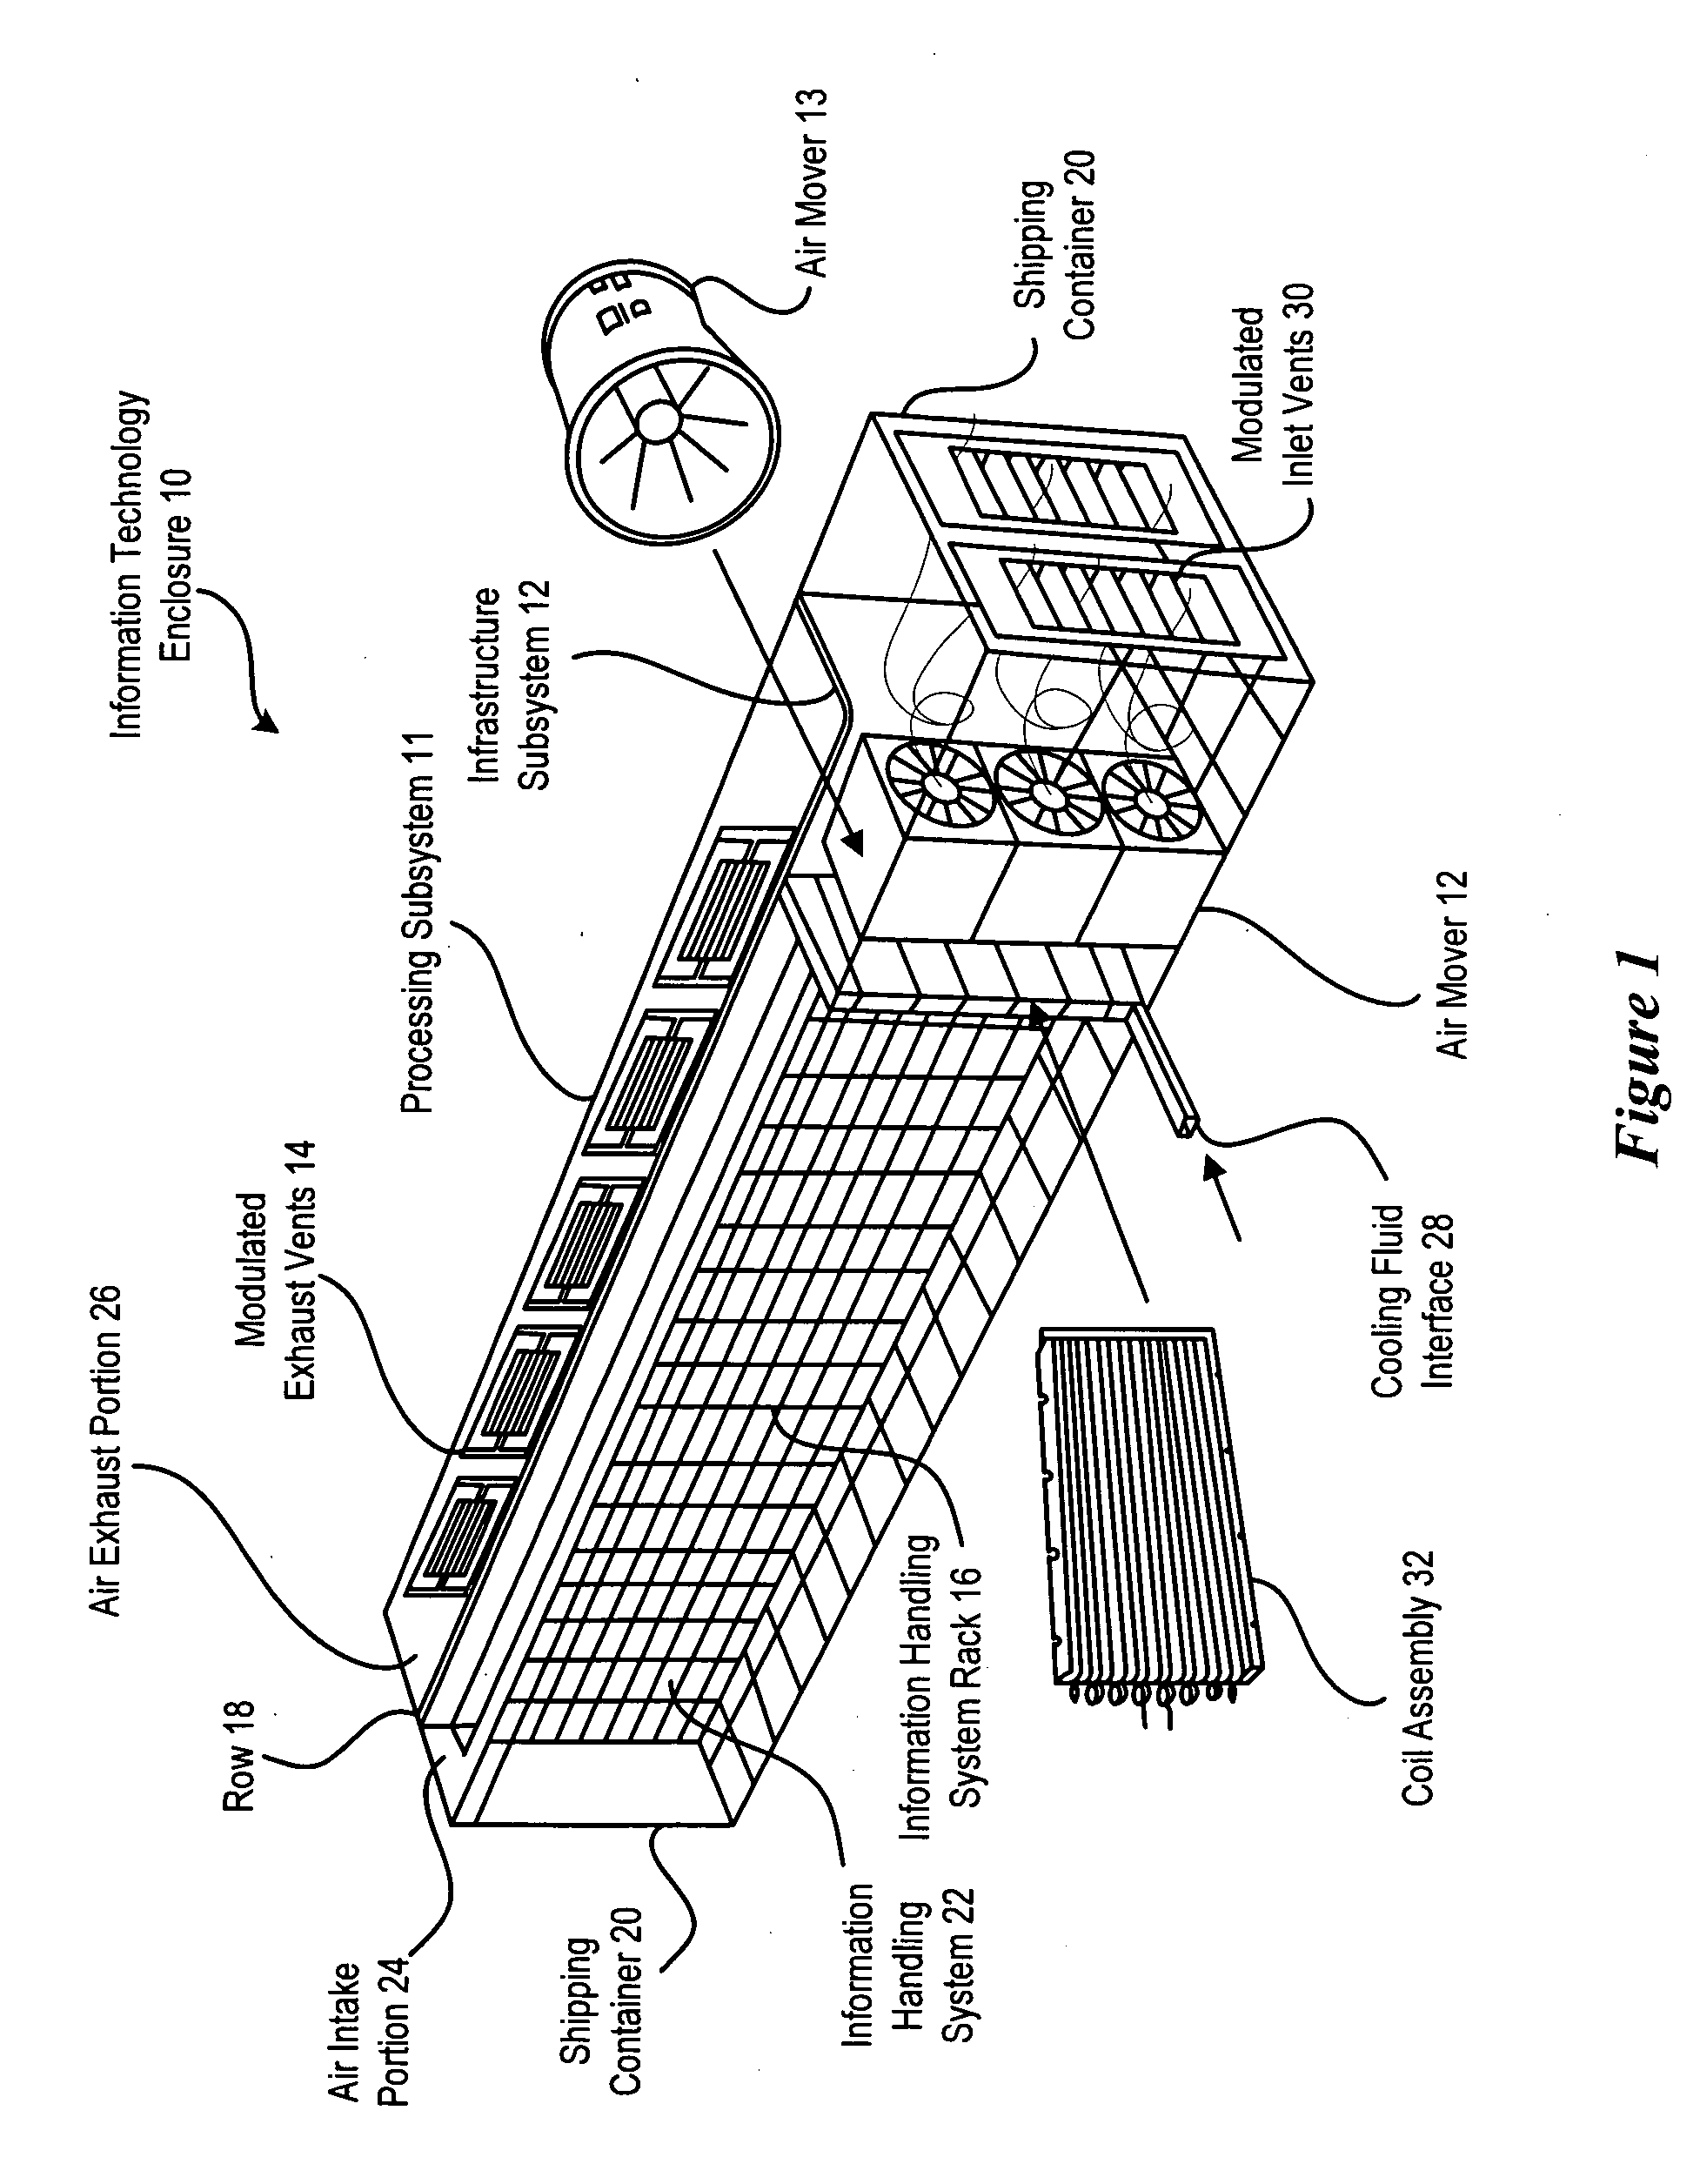 System and Method For Providing Information Handling Systems And Tuned Support Infrastructure In Separate Shipping Containers